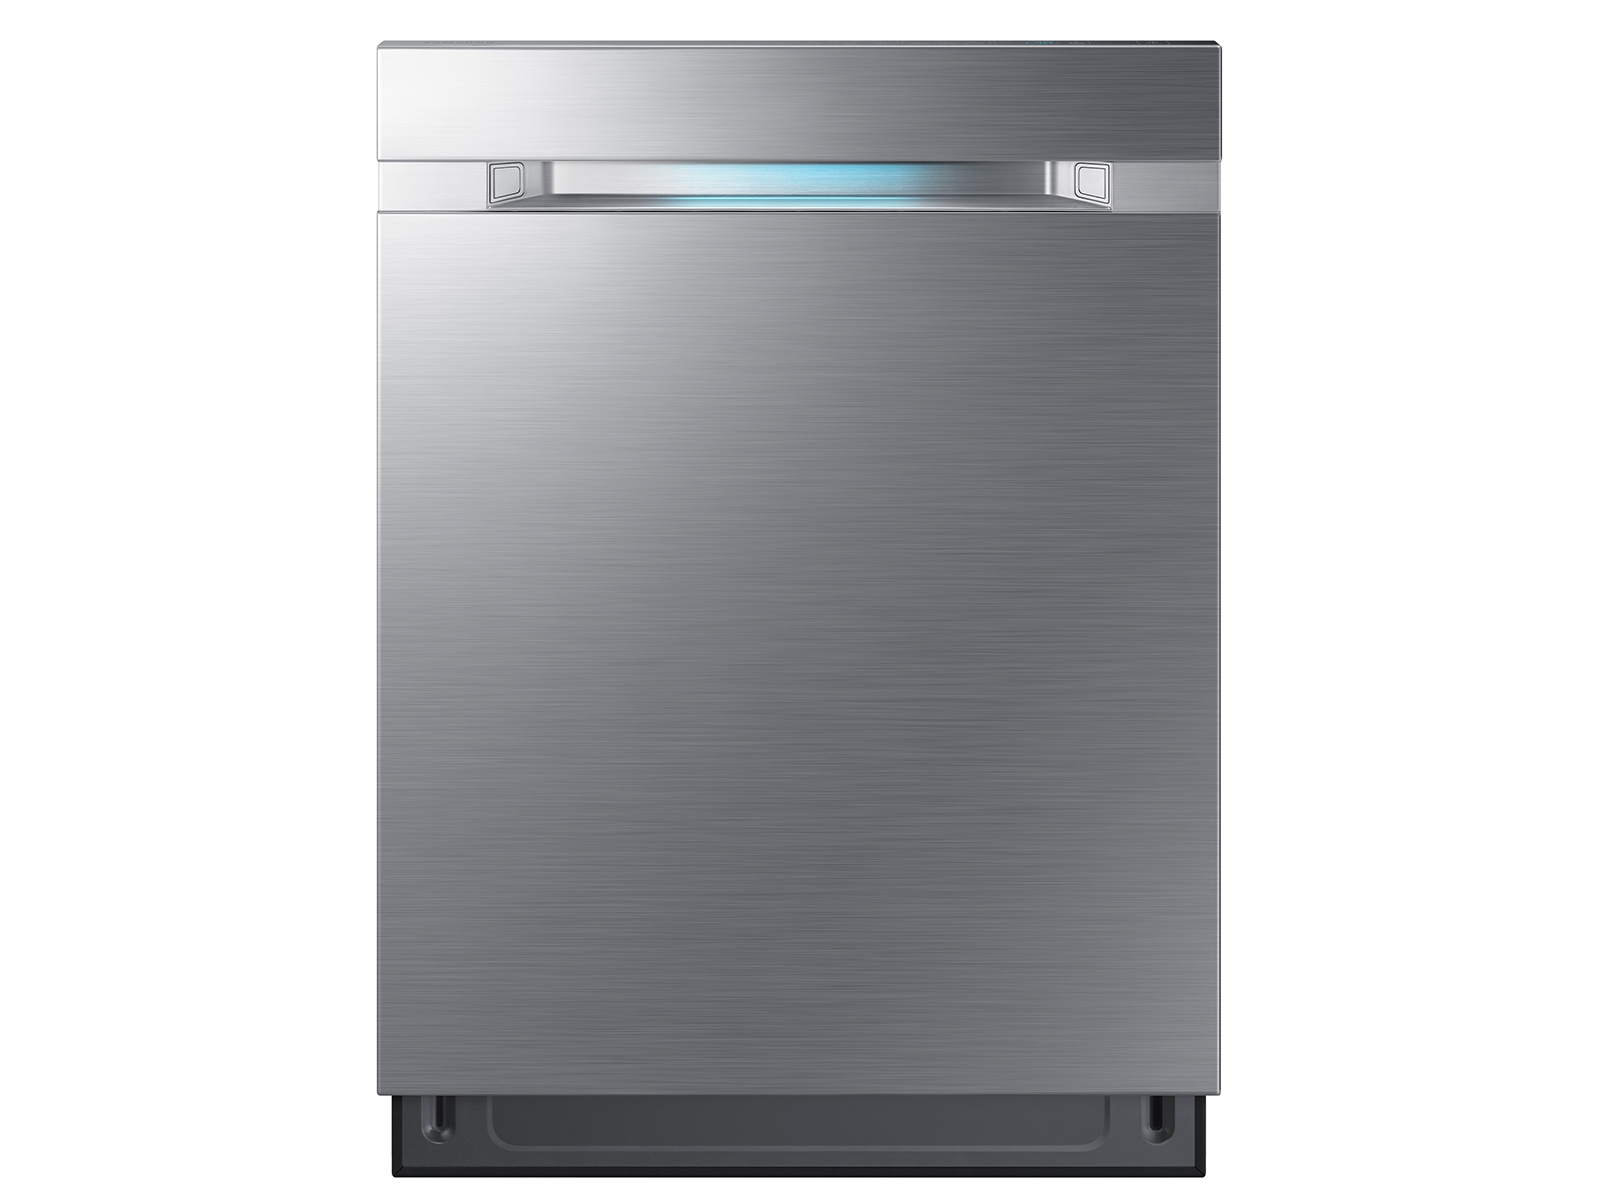 Top Control Dishwasher with WaterWall 